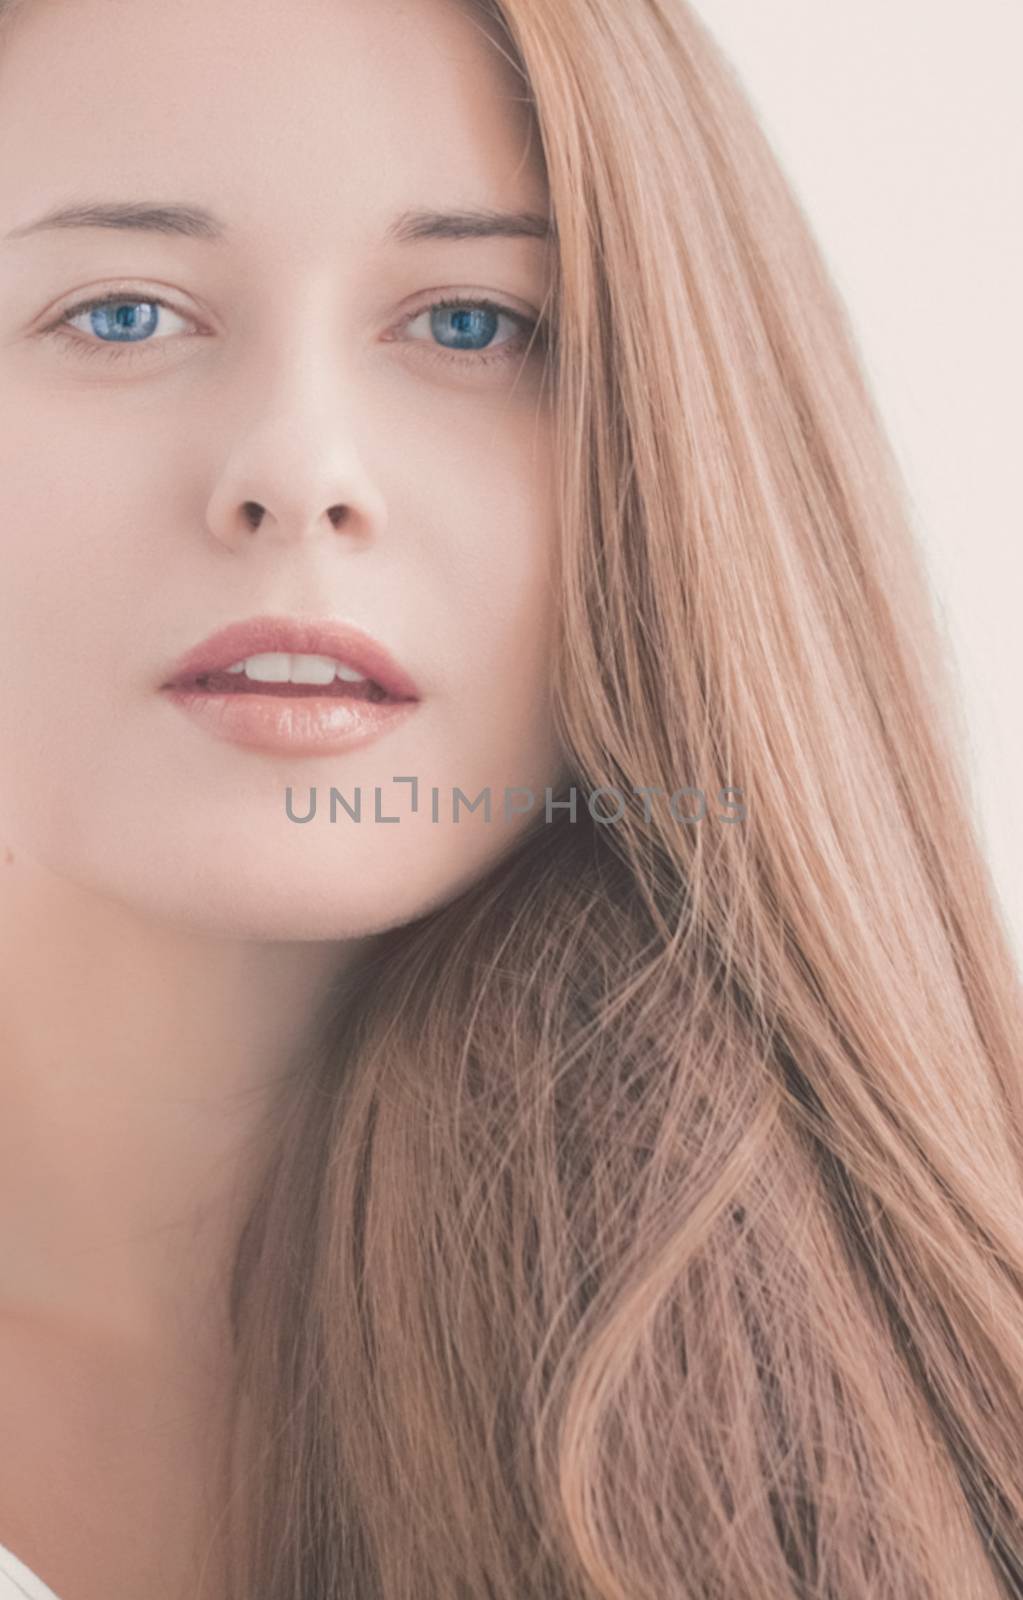 Woman as closeup beauty face portrait, young girl with natural makeup look and long hairstyle for female hair care, cosmetic or skincare brands